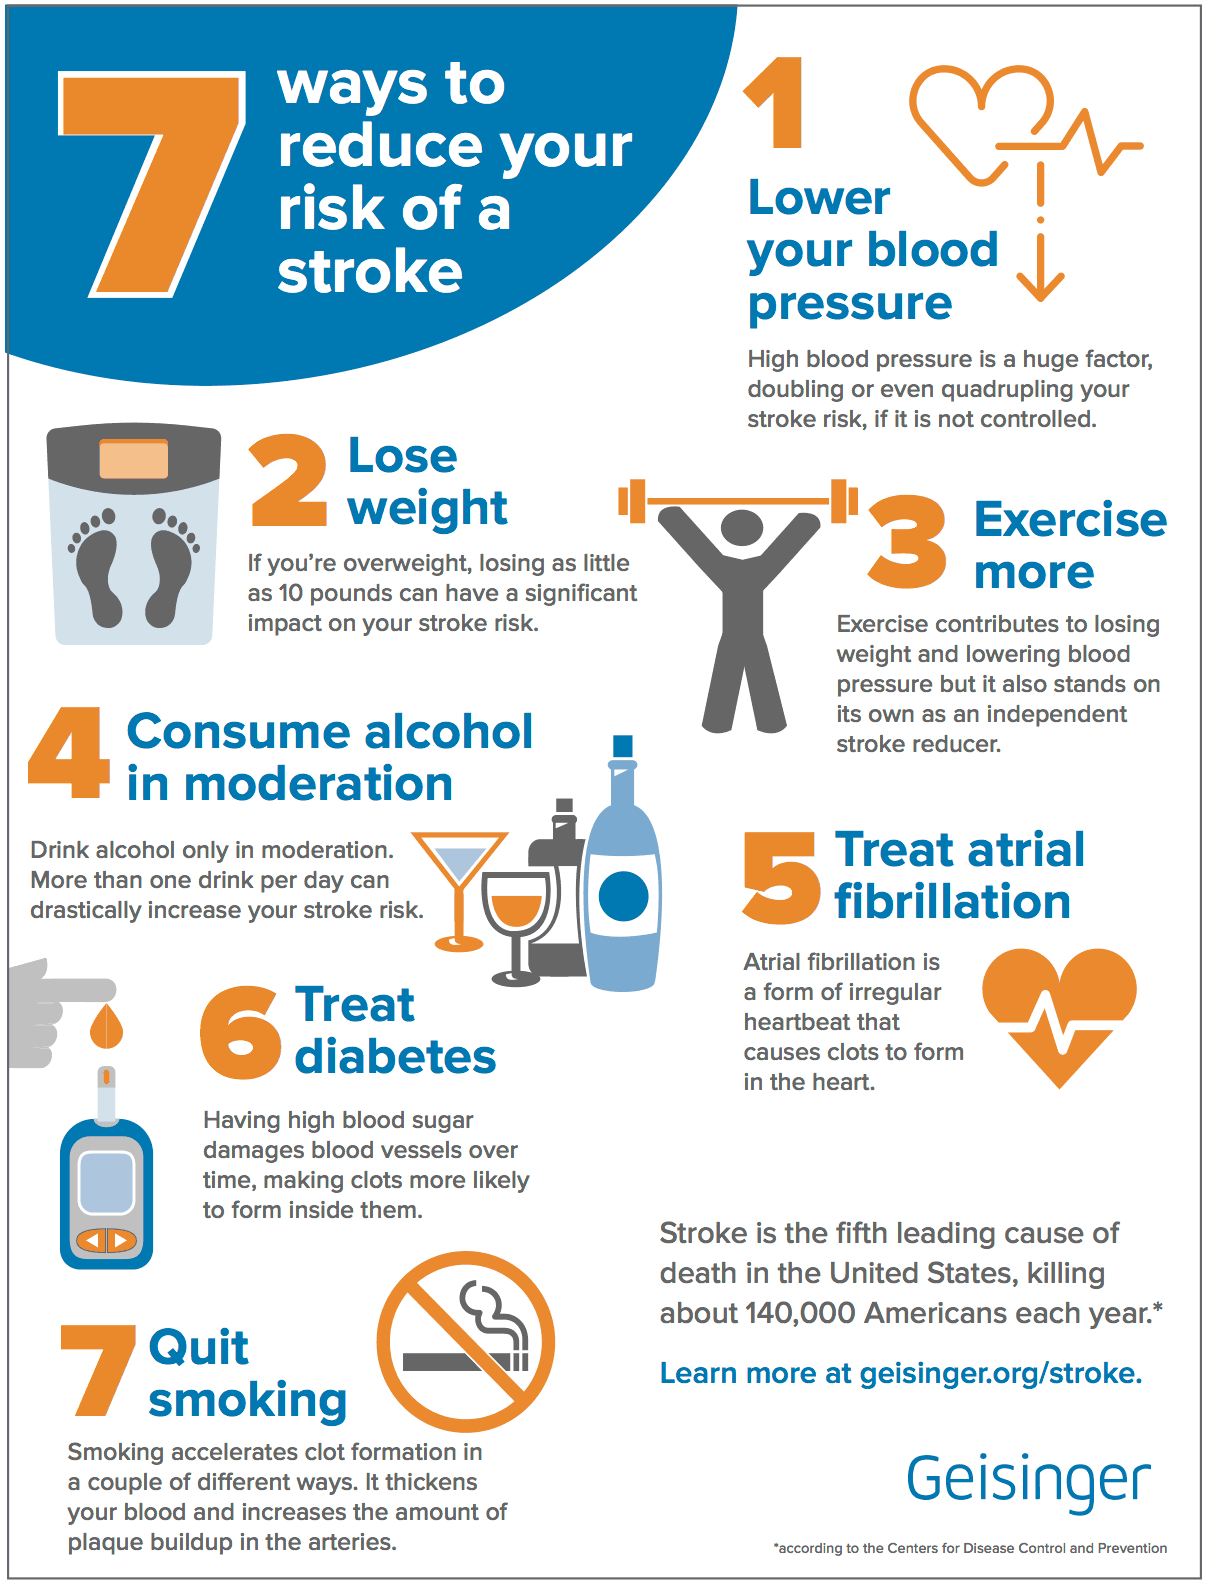 7 ways to reduce your risk of a stroke